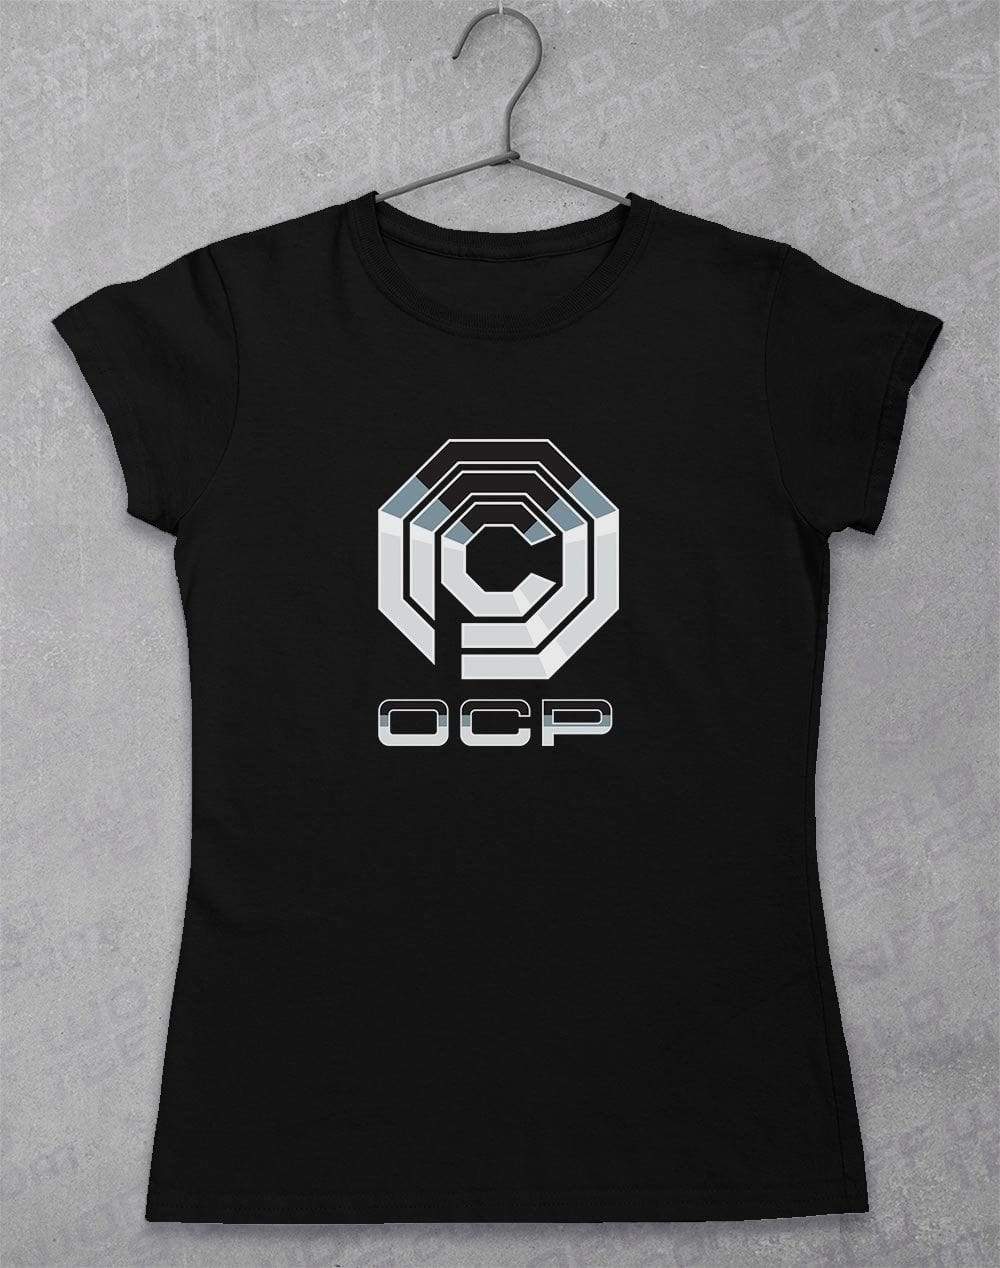 Omni Consumer Products - Women's T-Shirt 8-10 / Black  - Off World Tees